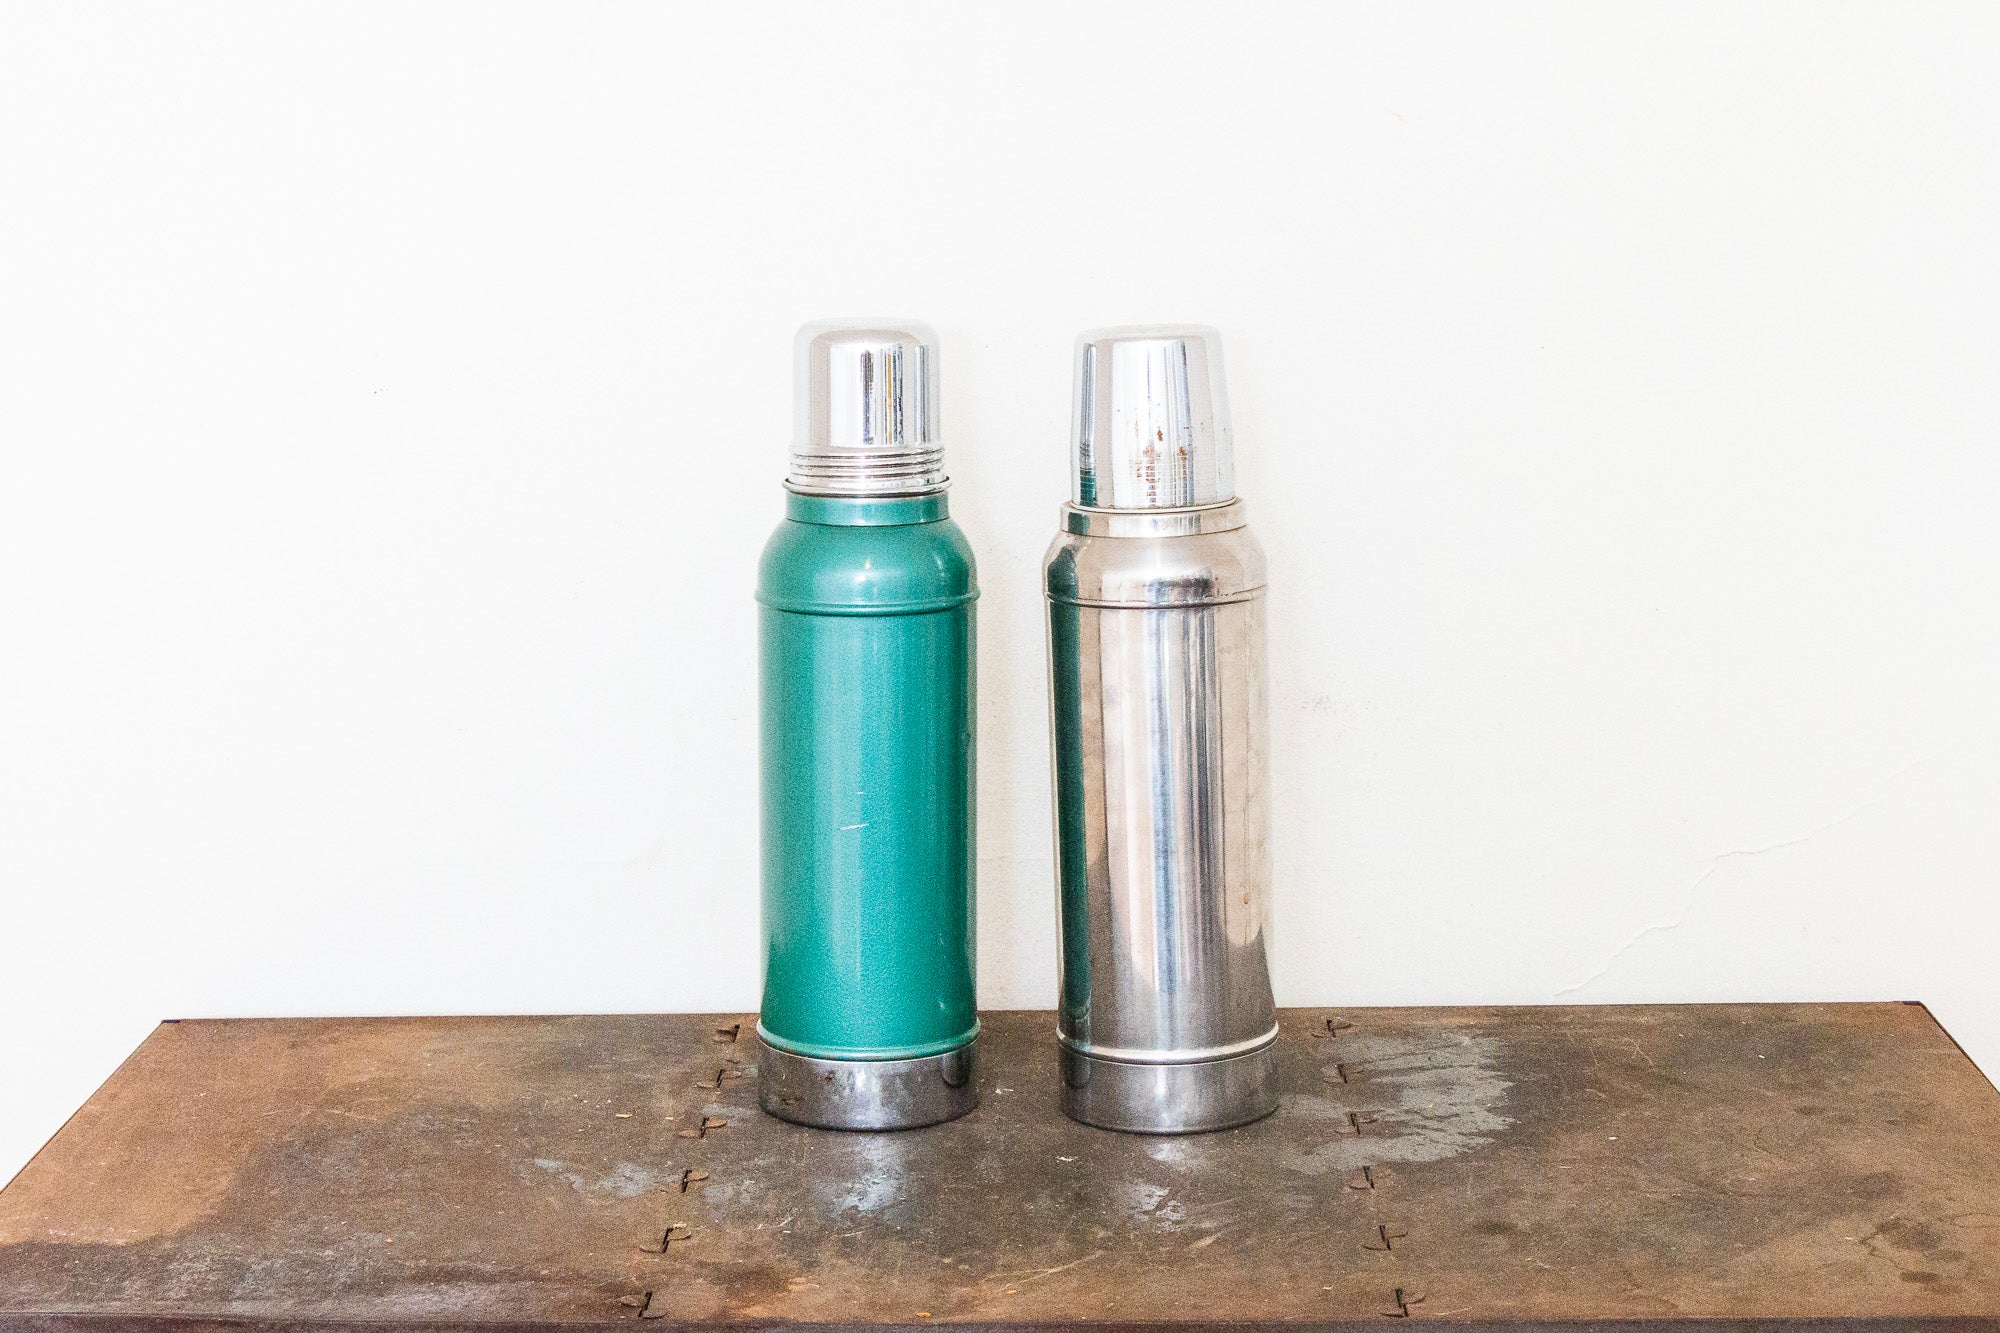 Set of 2 Large and Small Stanley Thermos Set 